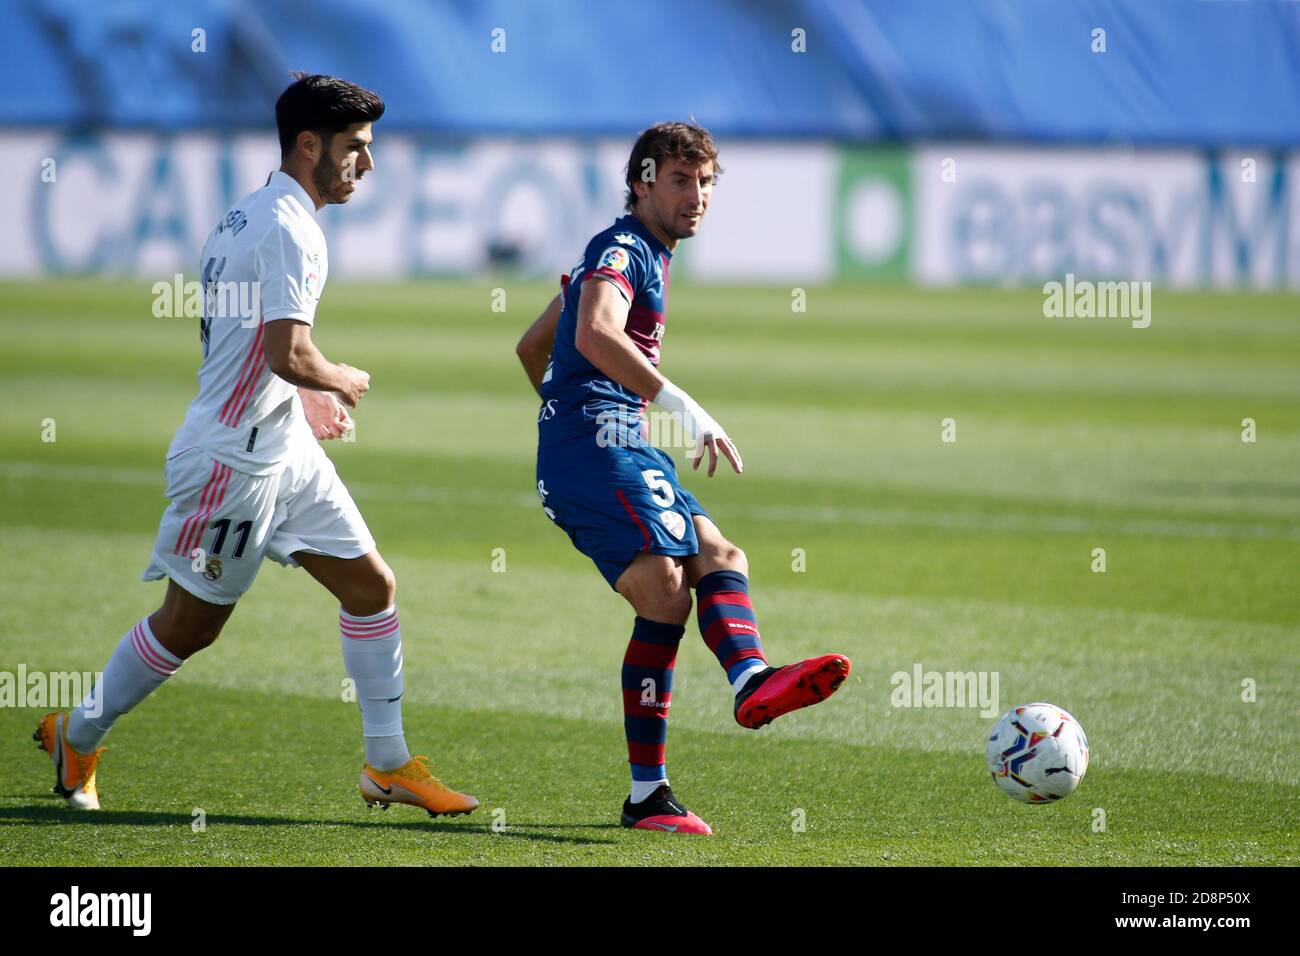 Madrid, Spain. 31st October, 2020. Pedro Mosquera of Huesca and Marco Asensio of Real Madrid in action during the Spanish championship La Liga football match between Real Madrid and SD Huesca on October 31, 2020 at Alfredo Di Stefano stadium in Valdebebas, Madrid, Spain - Photo Oscar J Barroso / Spain DPPI / DPPI Credit: LM/DPPI/Oscar Barroso/Alamy Live News Stock Photo